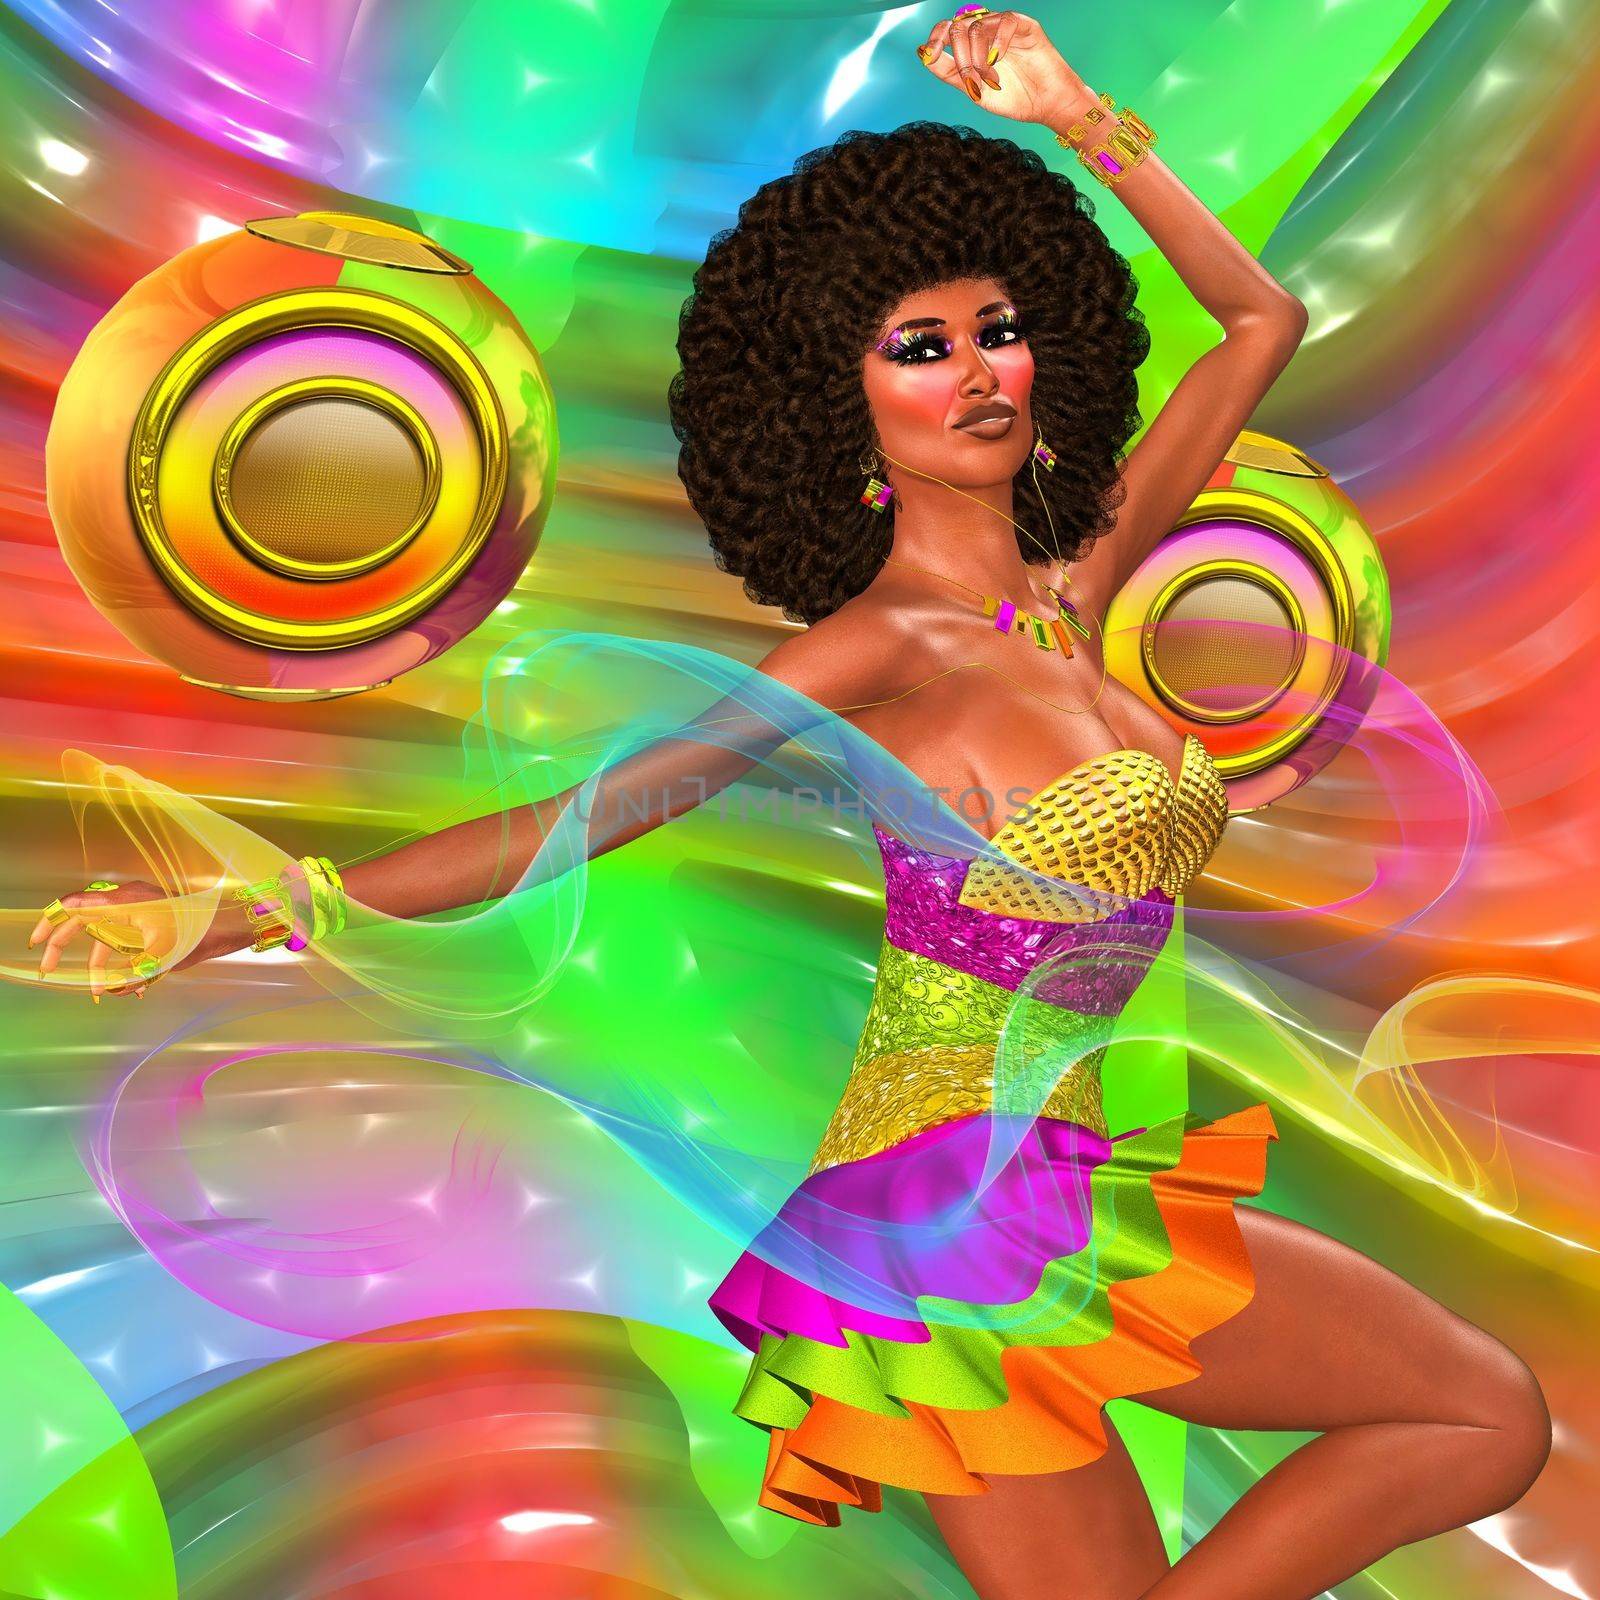 Disco dancing girl with afro, on abstract background. by TK0920